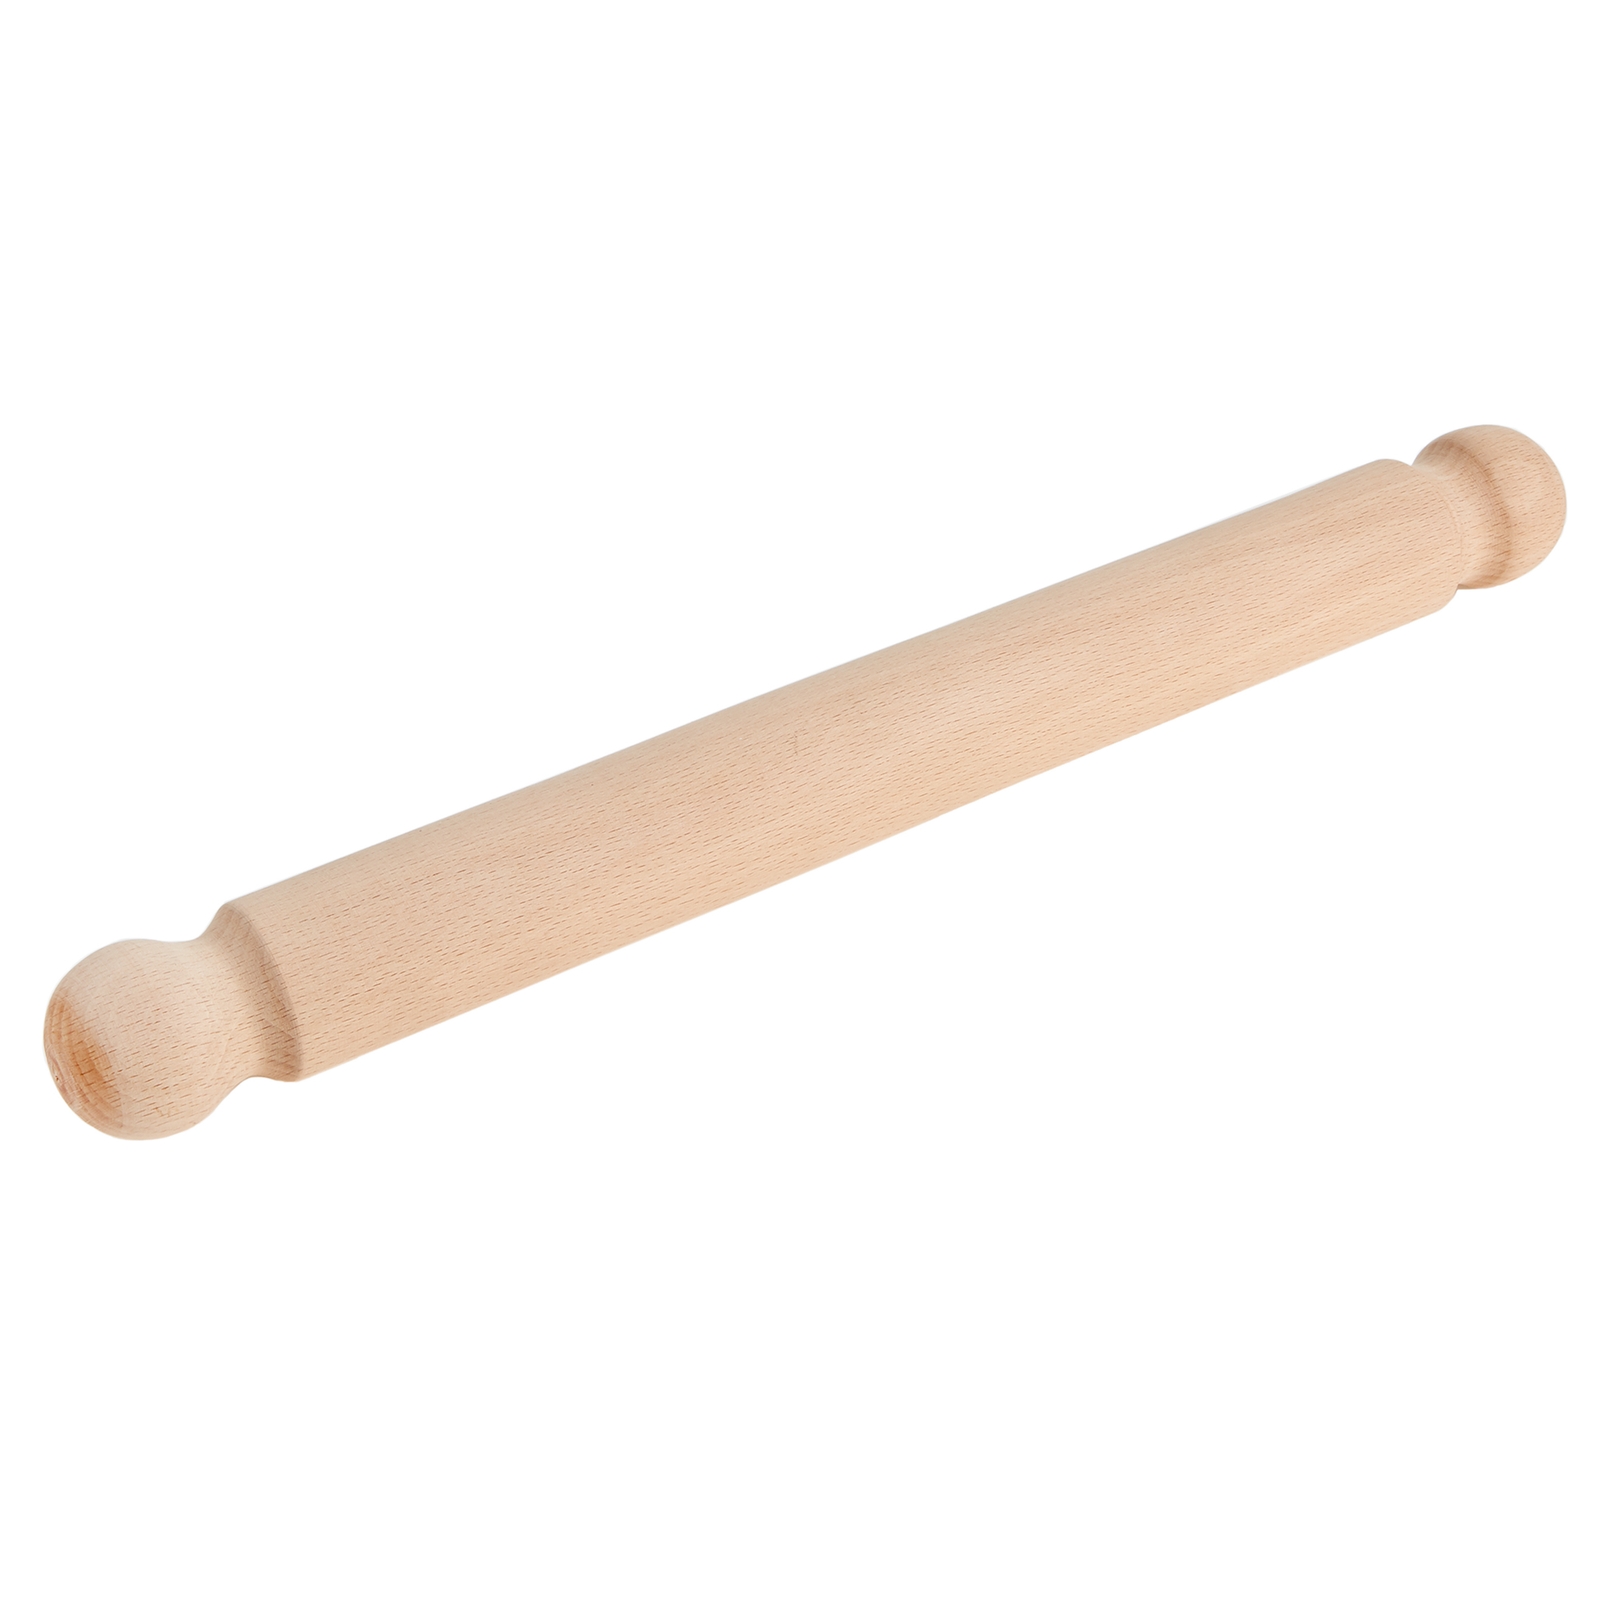 Wooden Rolling Pin - 40 x 400 x 40mm - Each